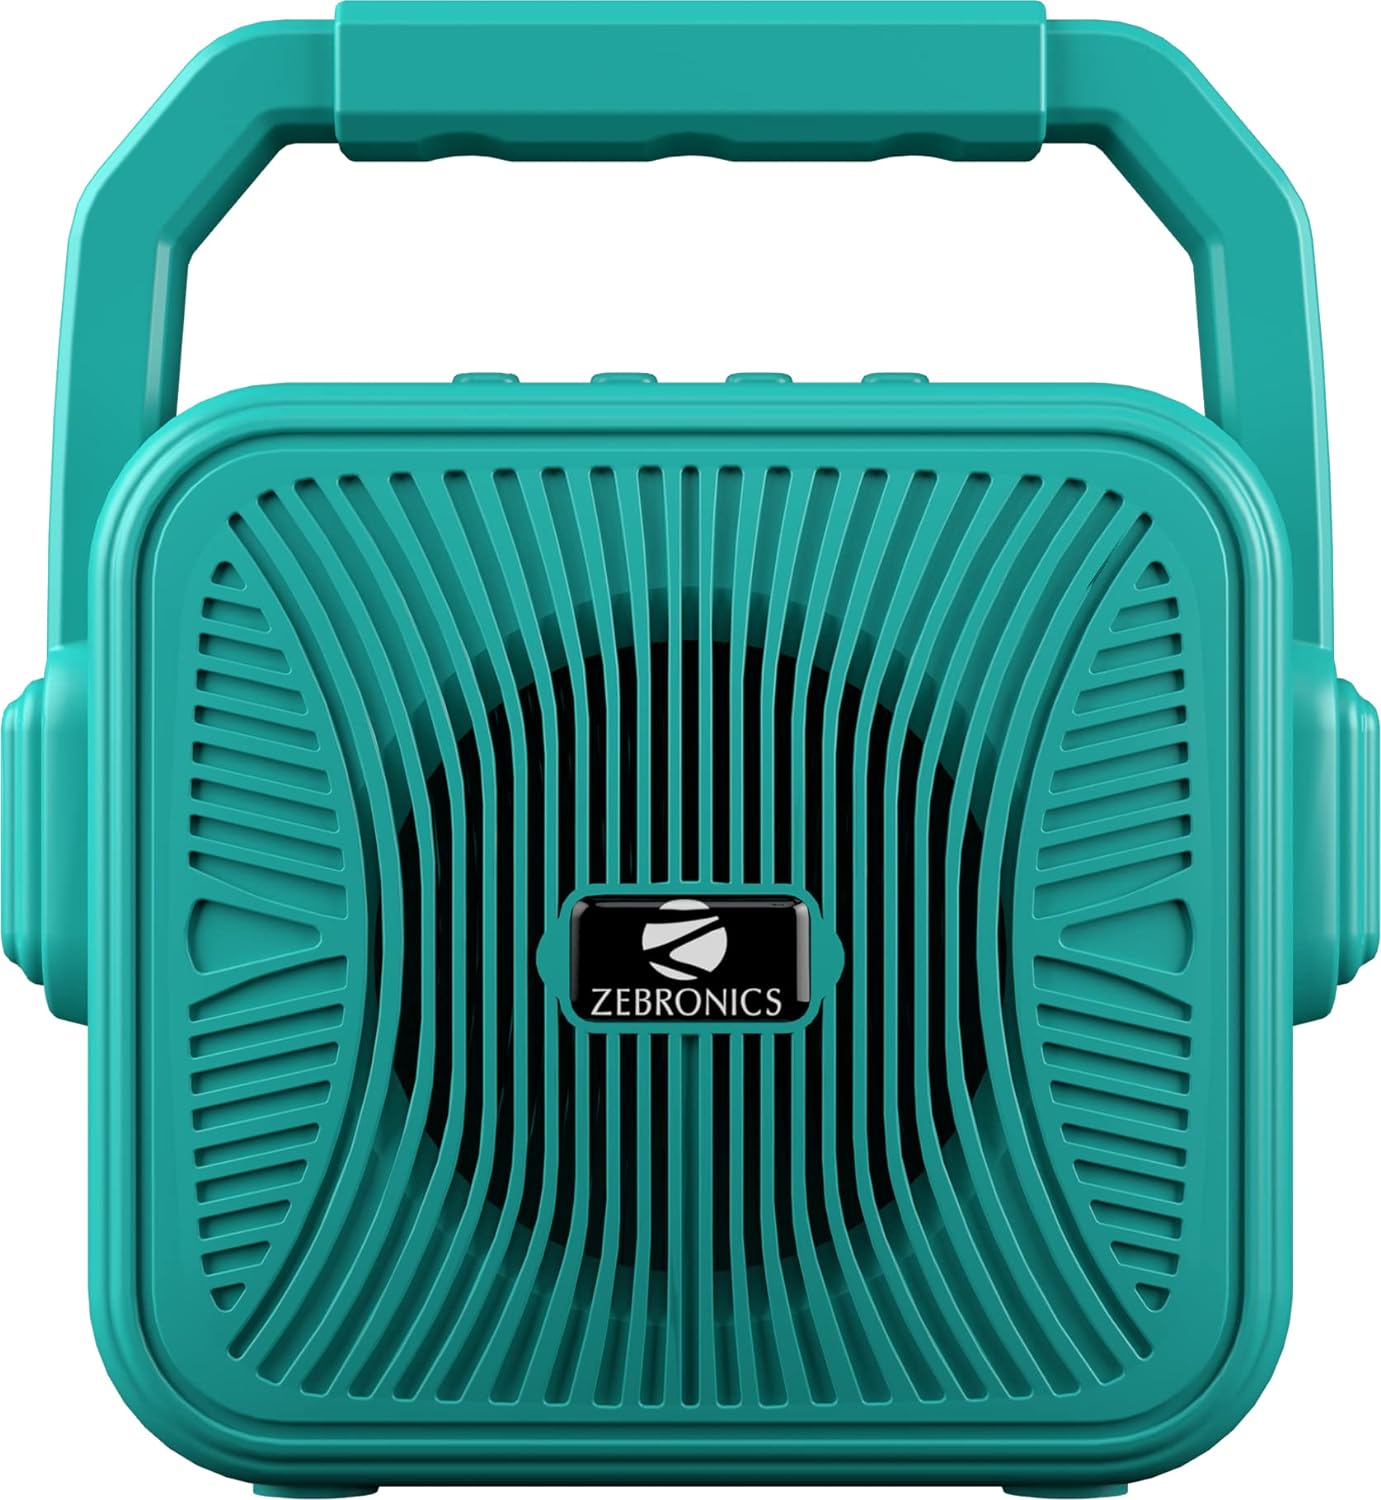 Zebronics Zeb-County 2 Portable Wireless Speaker Supporting Bluetooth v5.0, FM Radio, Call Function, Built-in Rechargeable Battery, USB/Micro SD Card Slot, 3.5mm AUX Input, TWS (Blue)